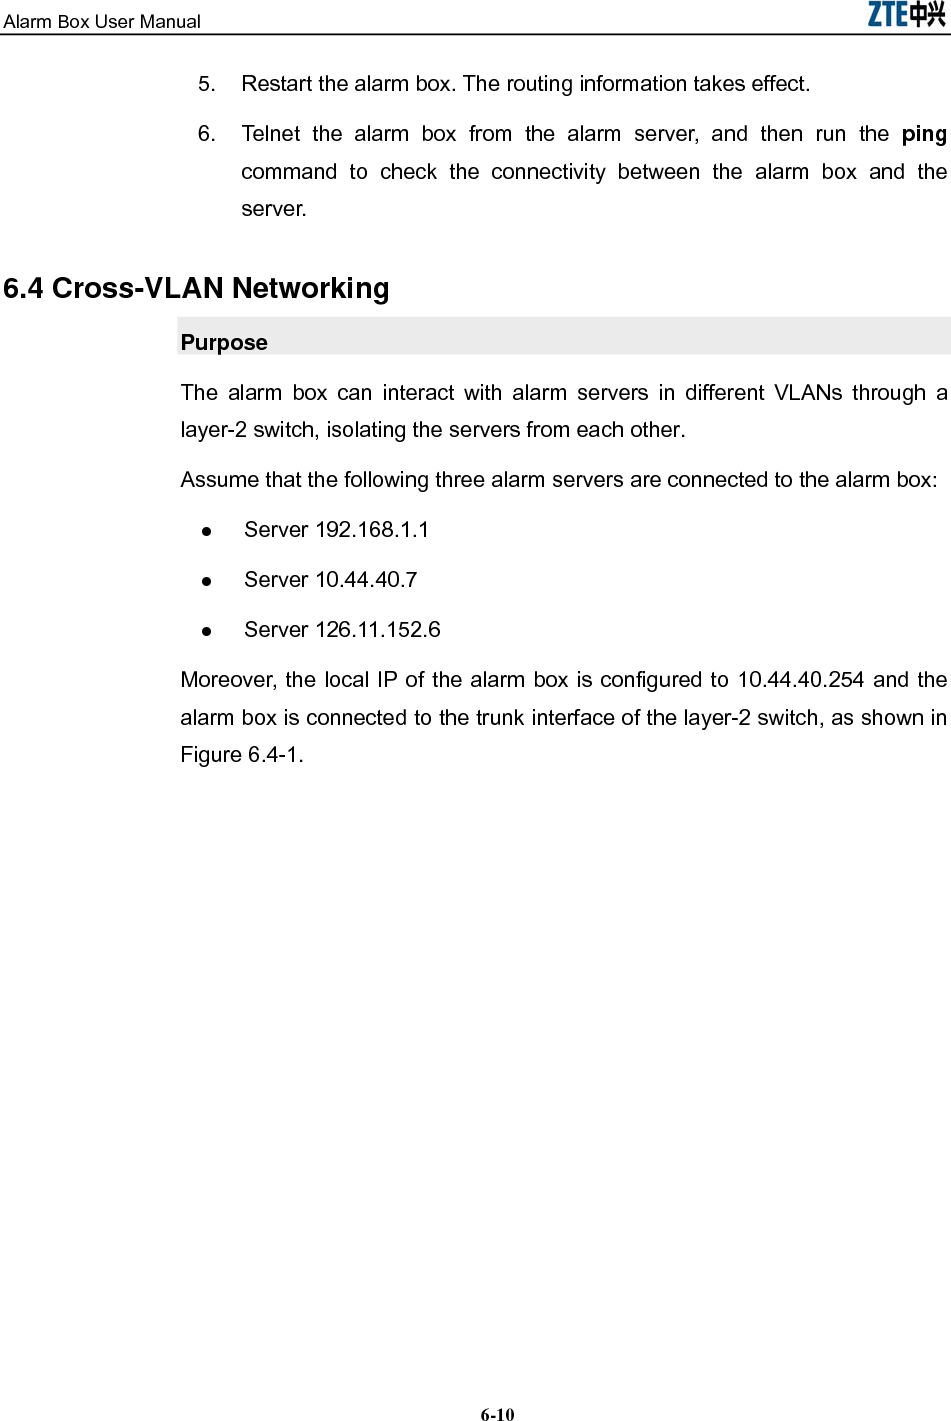 Alarm Box User Manual  6-105.  Restart the alarm box. The routing information takes effect. 6.  Telnet the alarm box from the alarm server, and then run the ping command to check the connectivity between the alarm box and the server. 6.4 Cross-VLAN Networking Purpose The alarm box can interact with alarm servers in different VLANs through a layer-2 switch, isolating the servers from each other. Assume that the following three alarm servers are connected to the alarm box:  Server 192.168.1.1  Server 10.44.40.7  Server 126.11.152.6 Moreover, the local IP of the alarm box is configured to 10.44.40.254 and the alarm box is connected to the trunk interface of the layer-2 switch, as shown in Figure 6.4-1. 